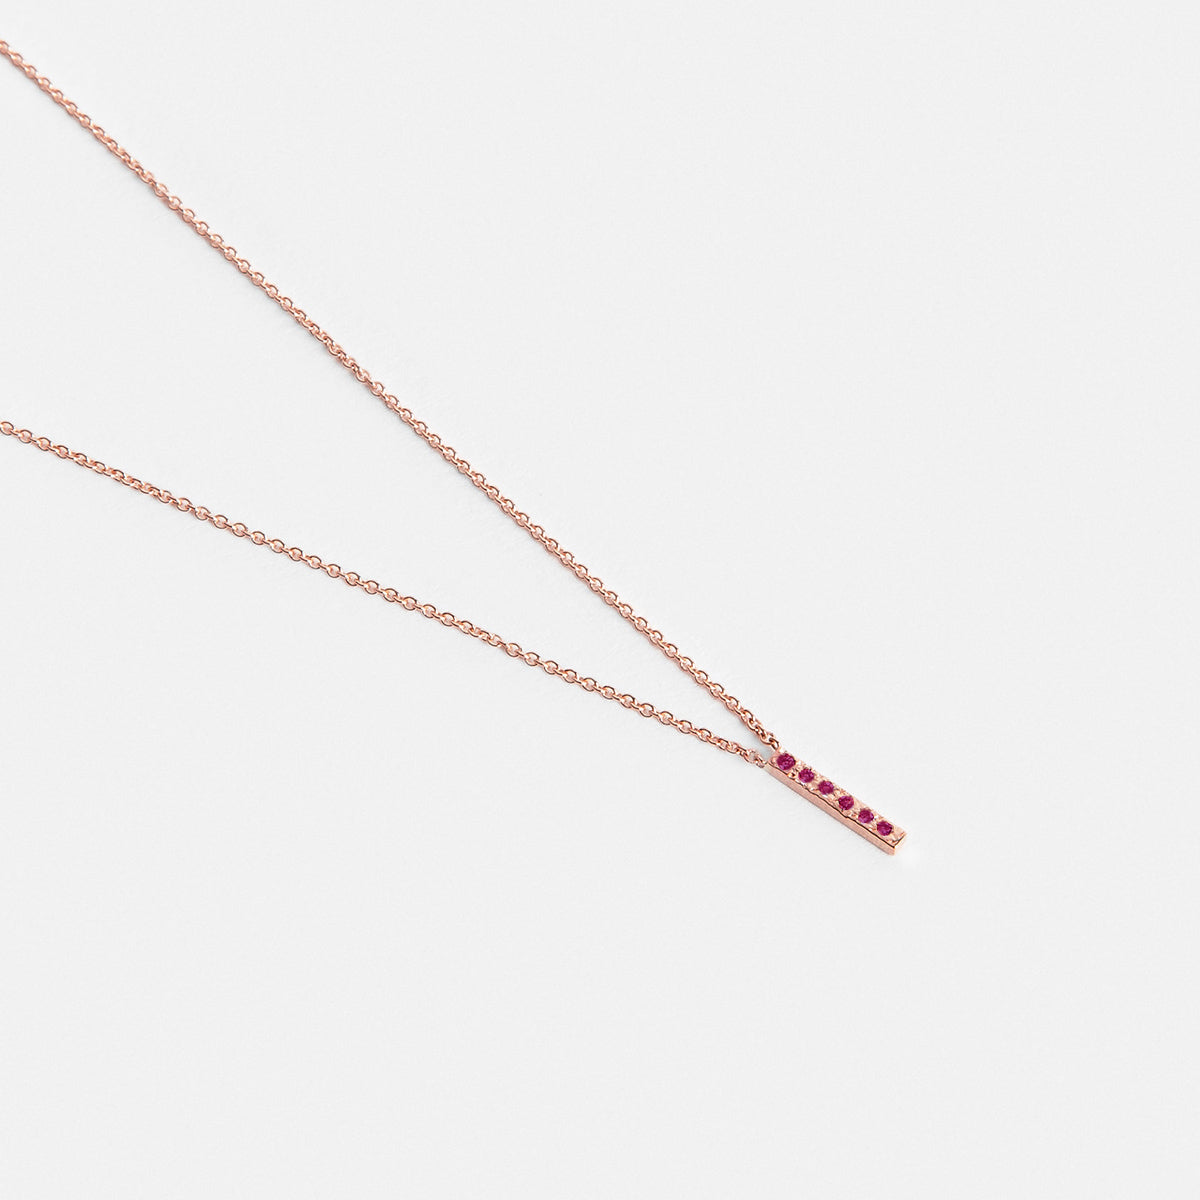 Mini Tiru Handmade Necklace in 14k Rose Gold set with Ruby By SHW Fine Jewelry NYC